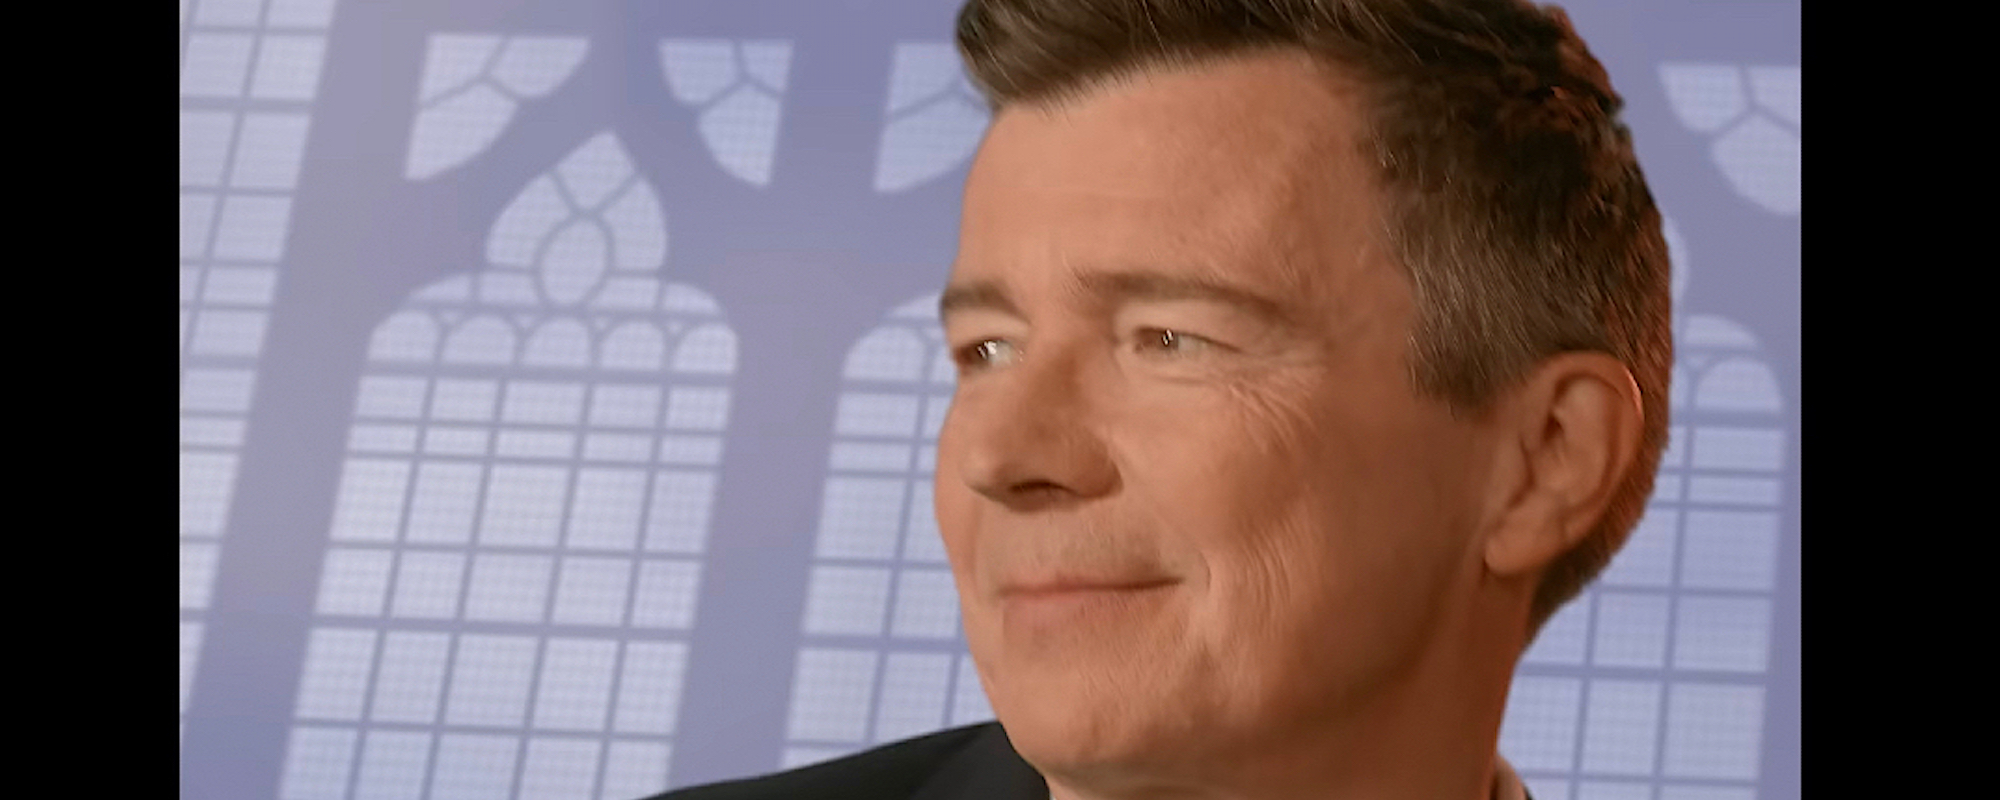 Rick Astley Recreates “Never Gonna Give You Up” Video 35 Years Later